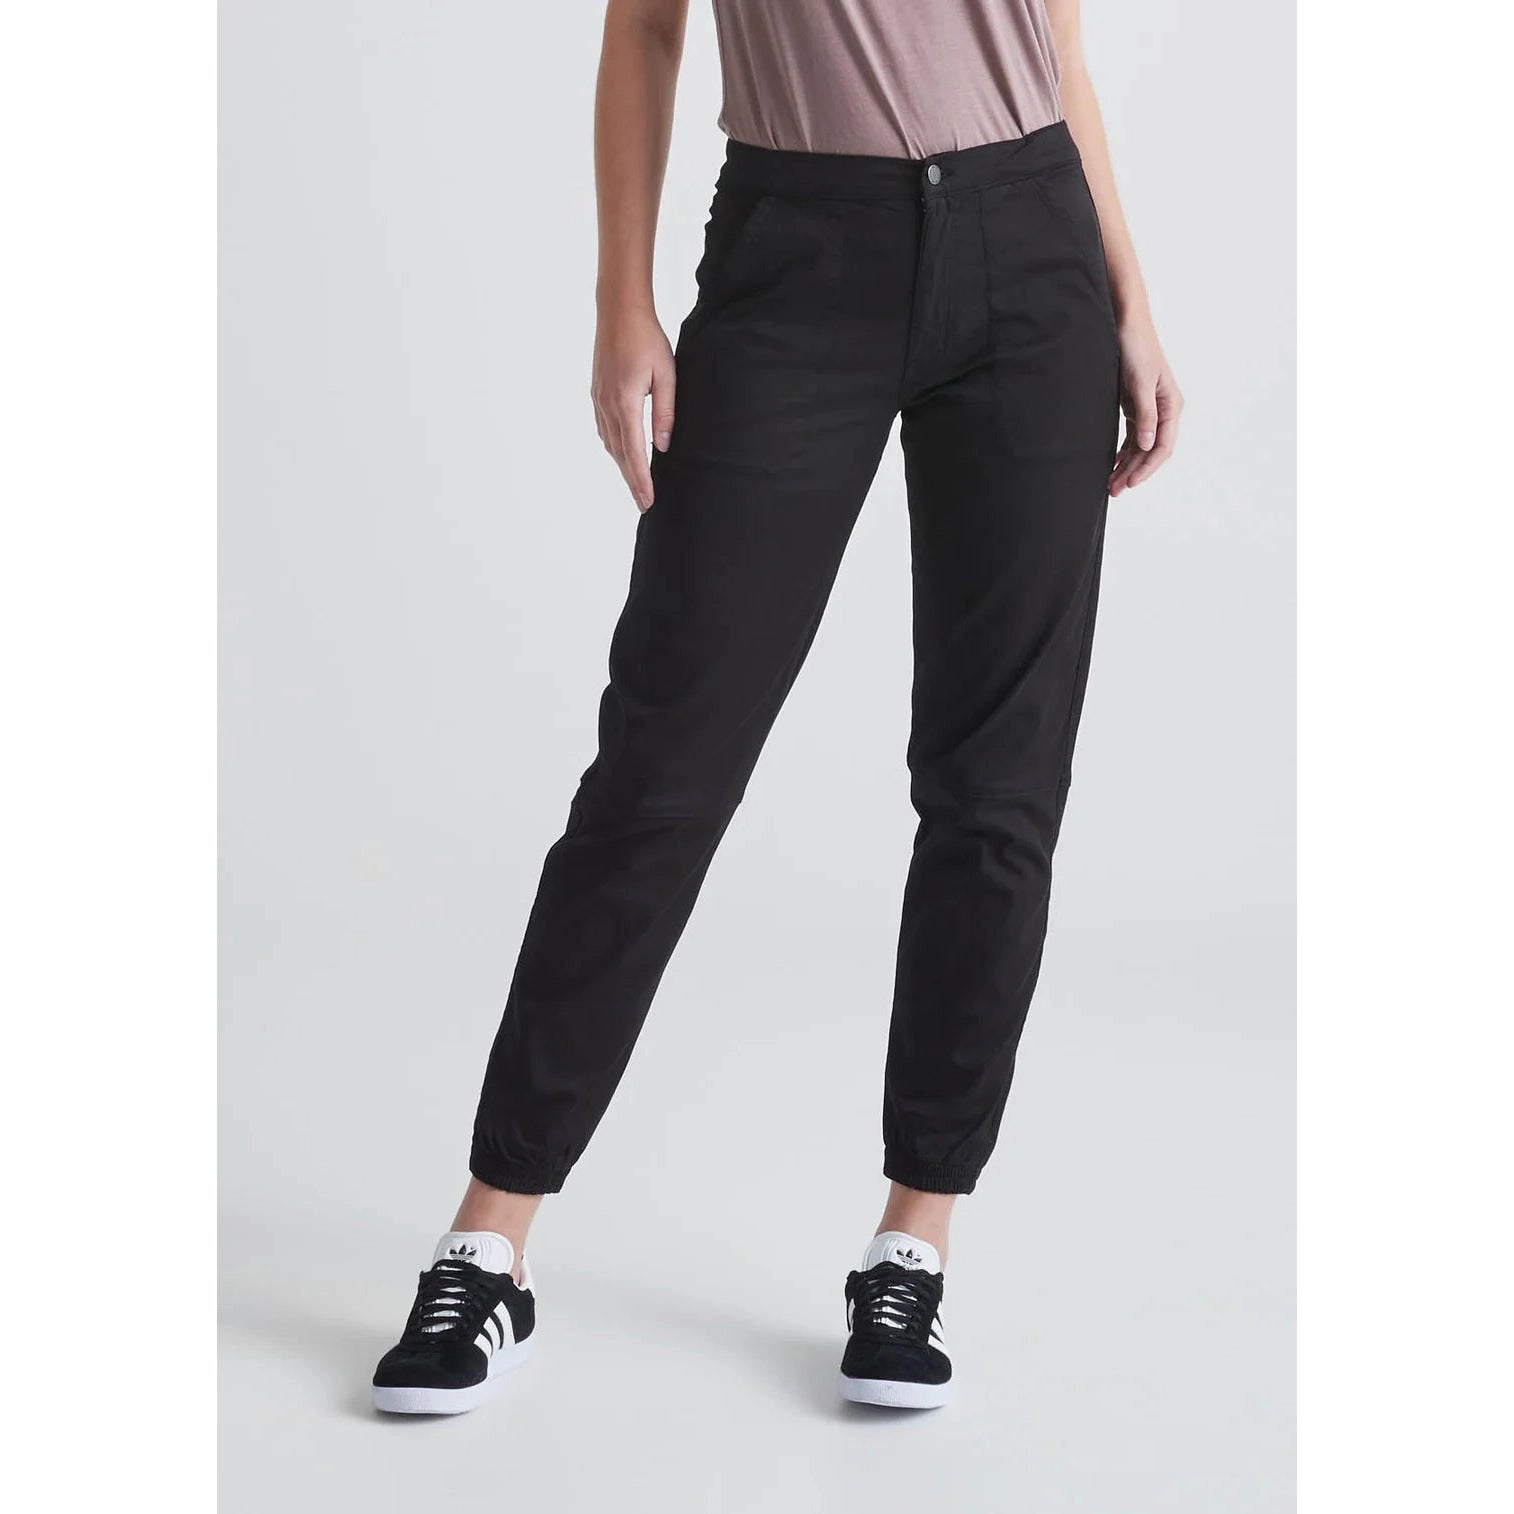 HIGH RISE LIVE FREE JOGGER-Joggers-DUER-26-BLACK-Coriander